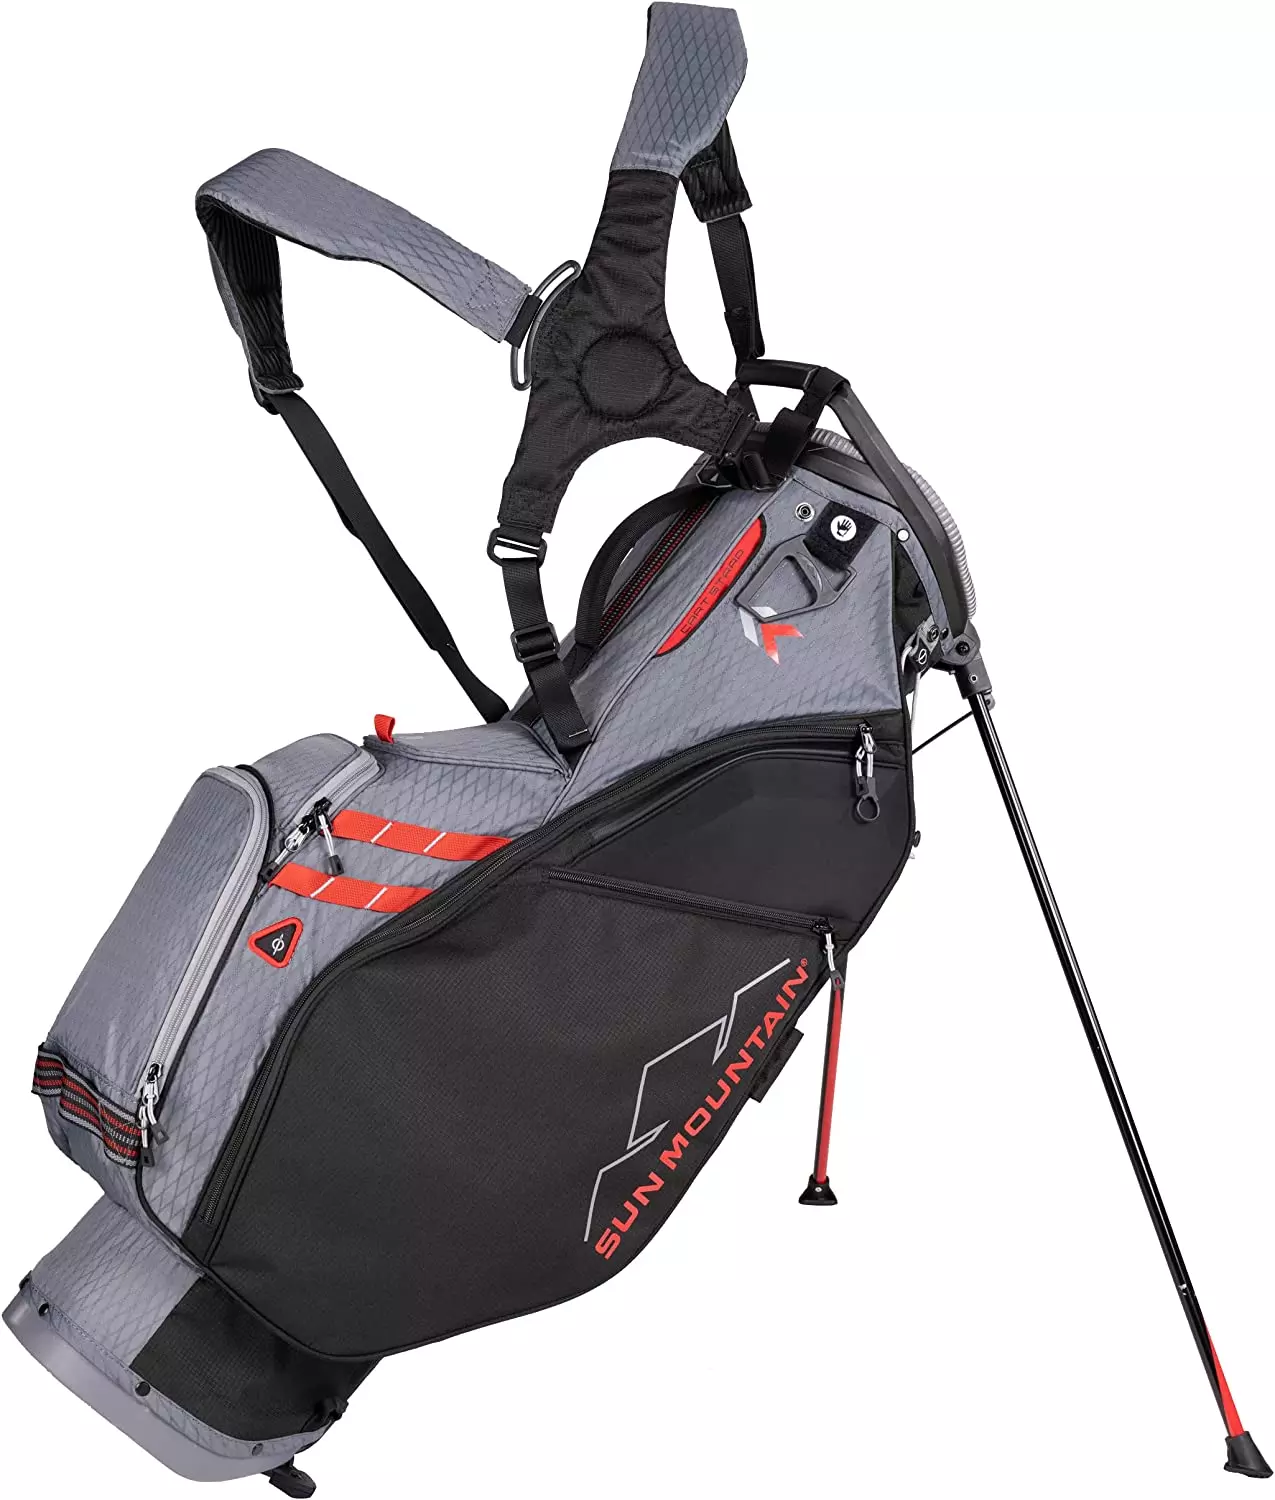 2023 Sun Mountain 4.5 LS 14 Divider Bag in Gray, Black with Red stripes